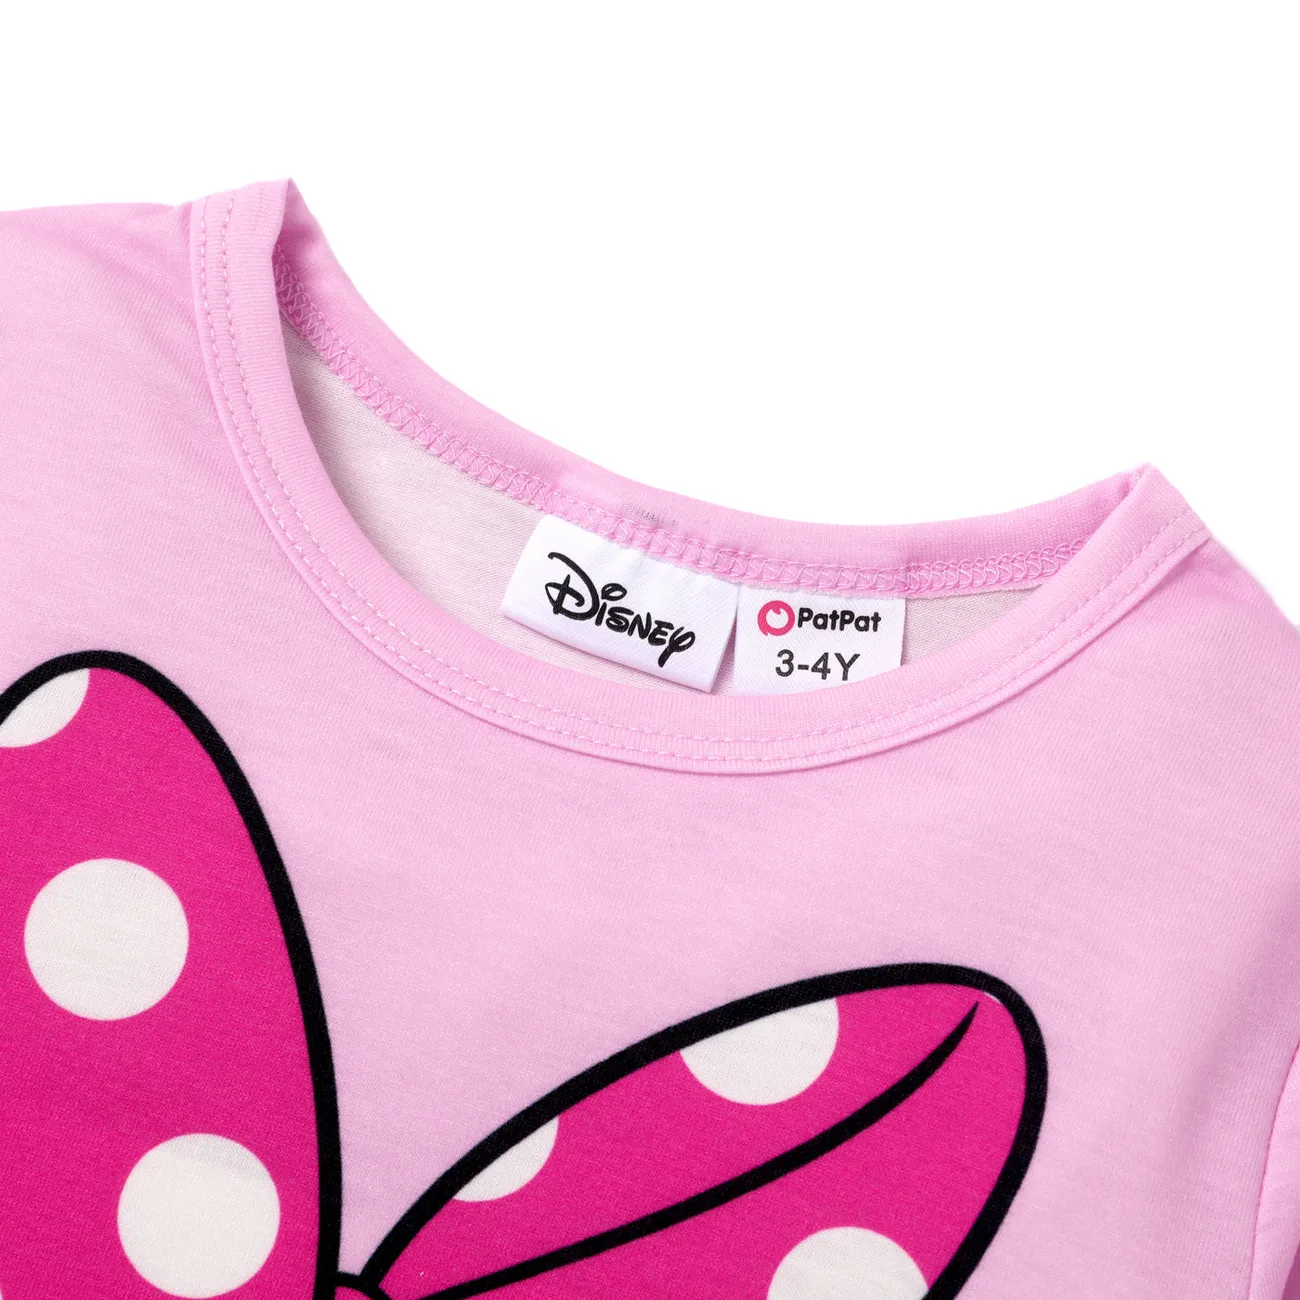 Disney Mickey and Friends Unissexo Infantil T-shirts Rosa big image 1